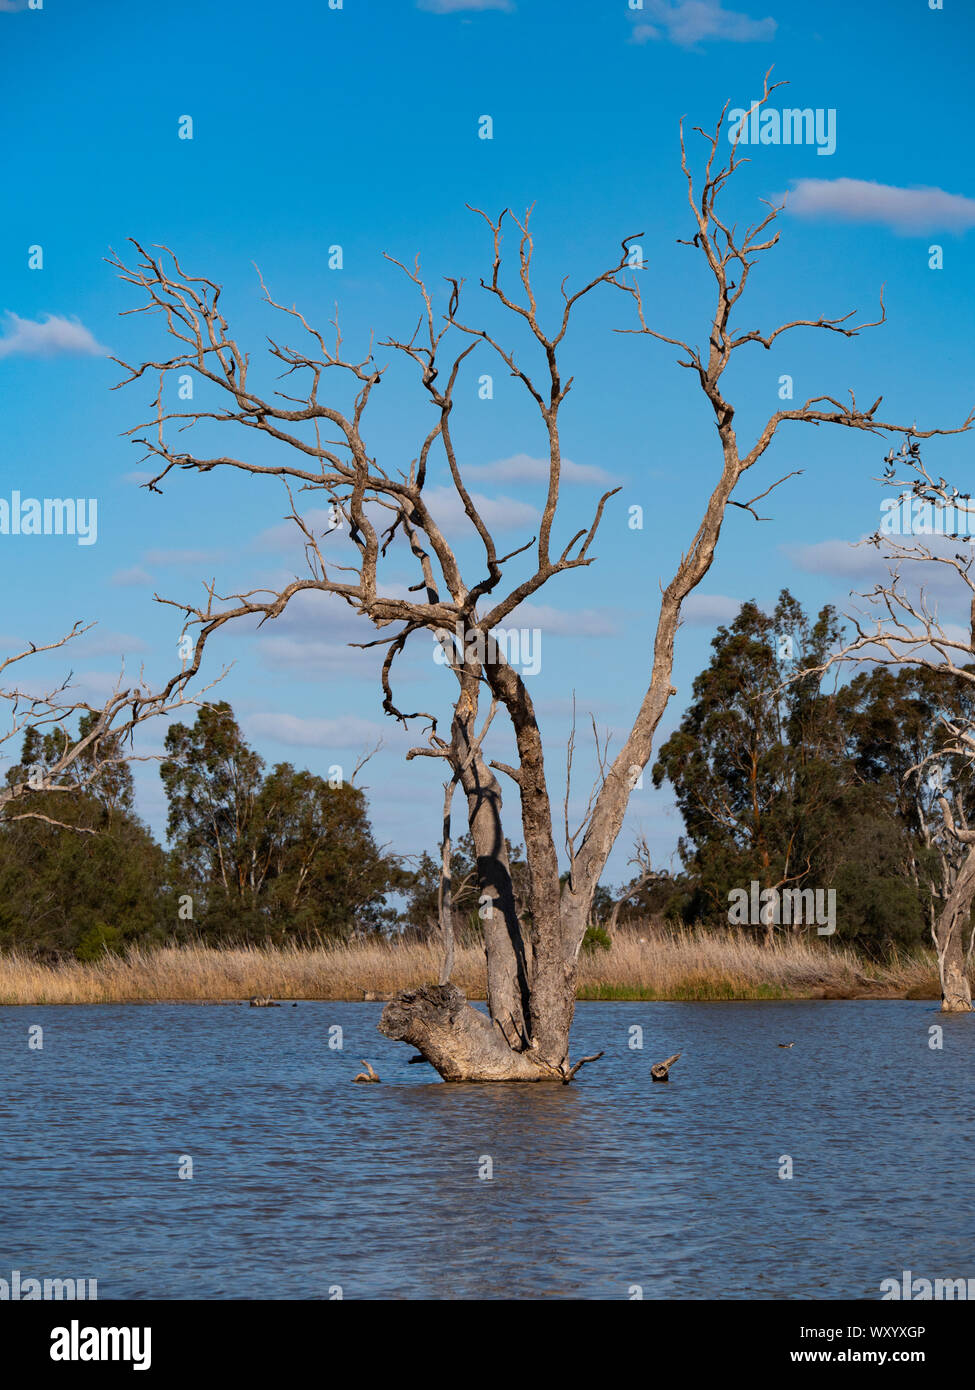 Wetland bird habitat at Warren in outback New South Wales Australia. A popular travel destination from Dubbo. Stock Photo